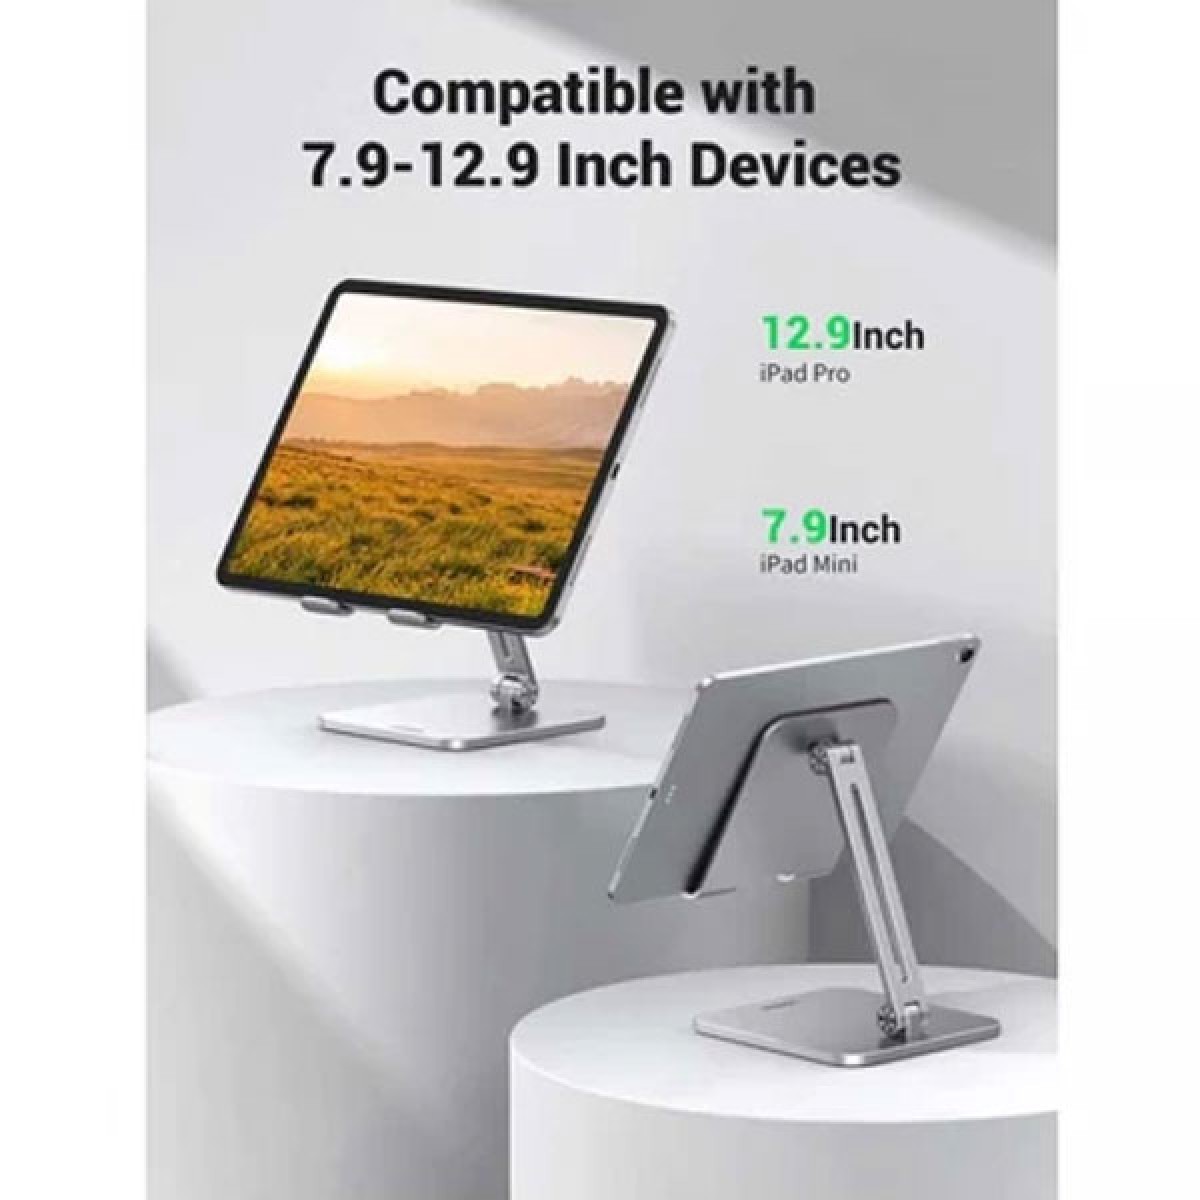 UGREEN LP134 (40393) Foldable Metal Tablet Stand price in BD